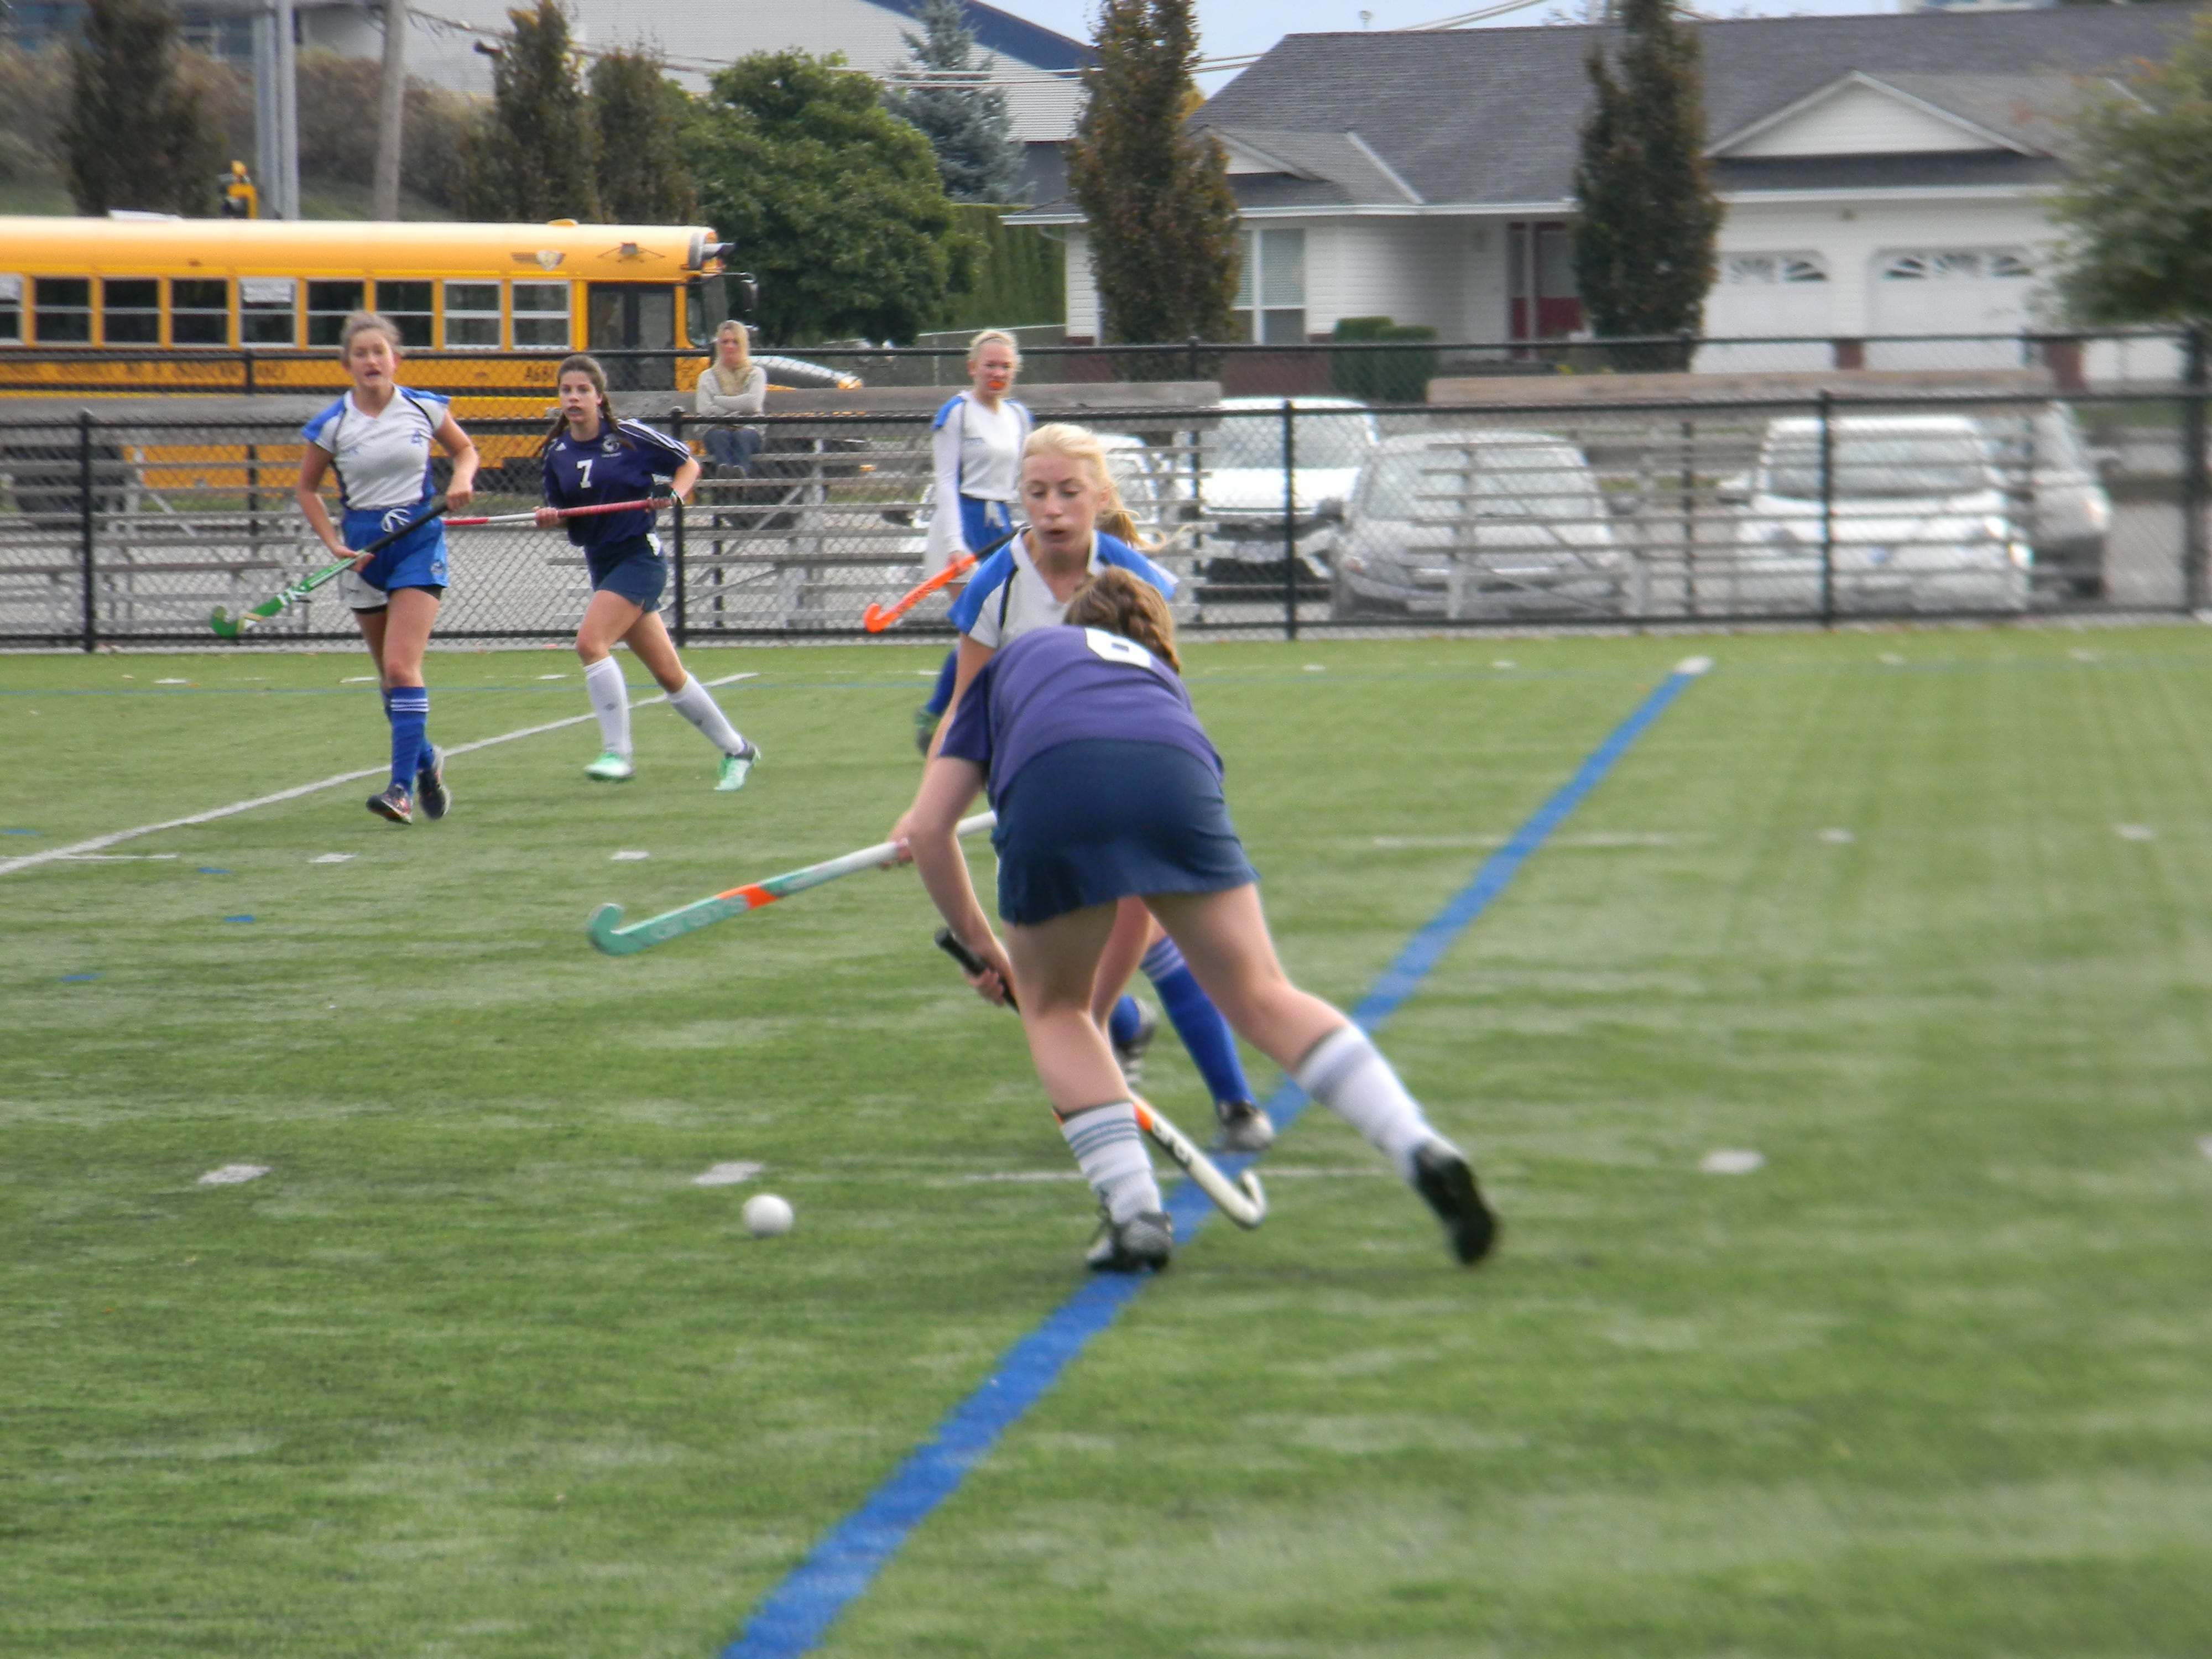 Bombers flying high after 4-0 mark at Chilliwack High School Girl’s Field Hockey Tournament